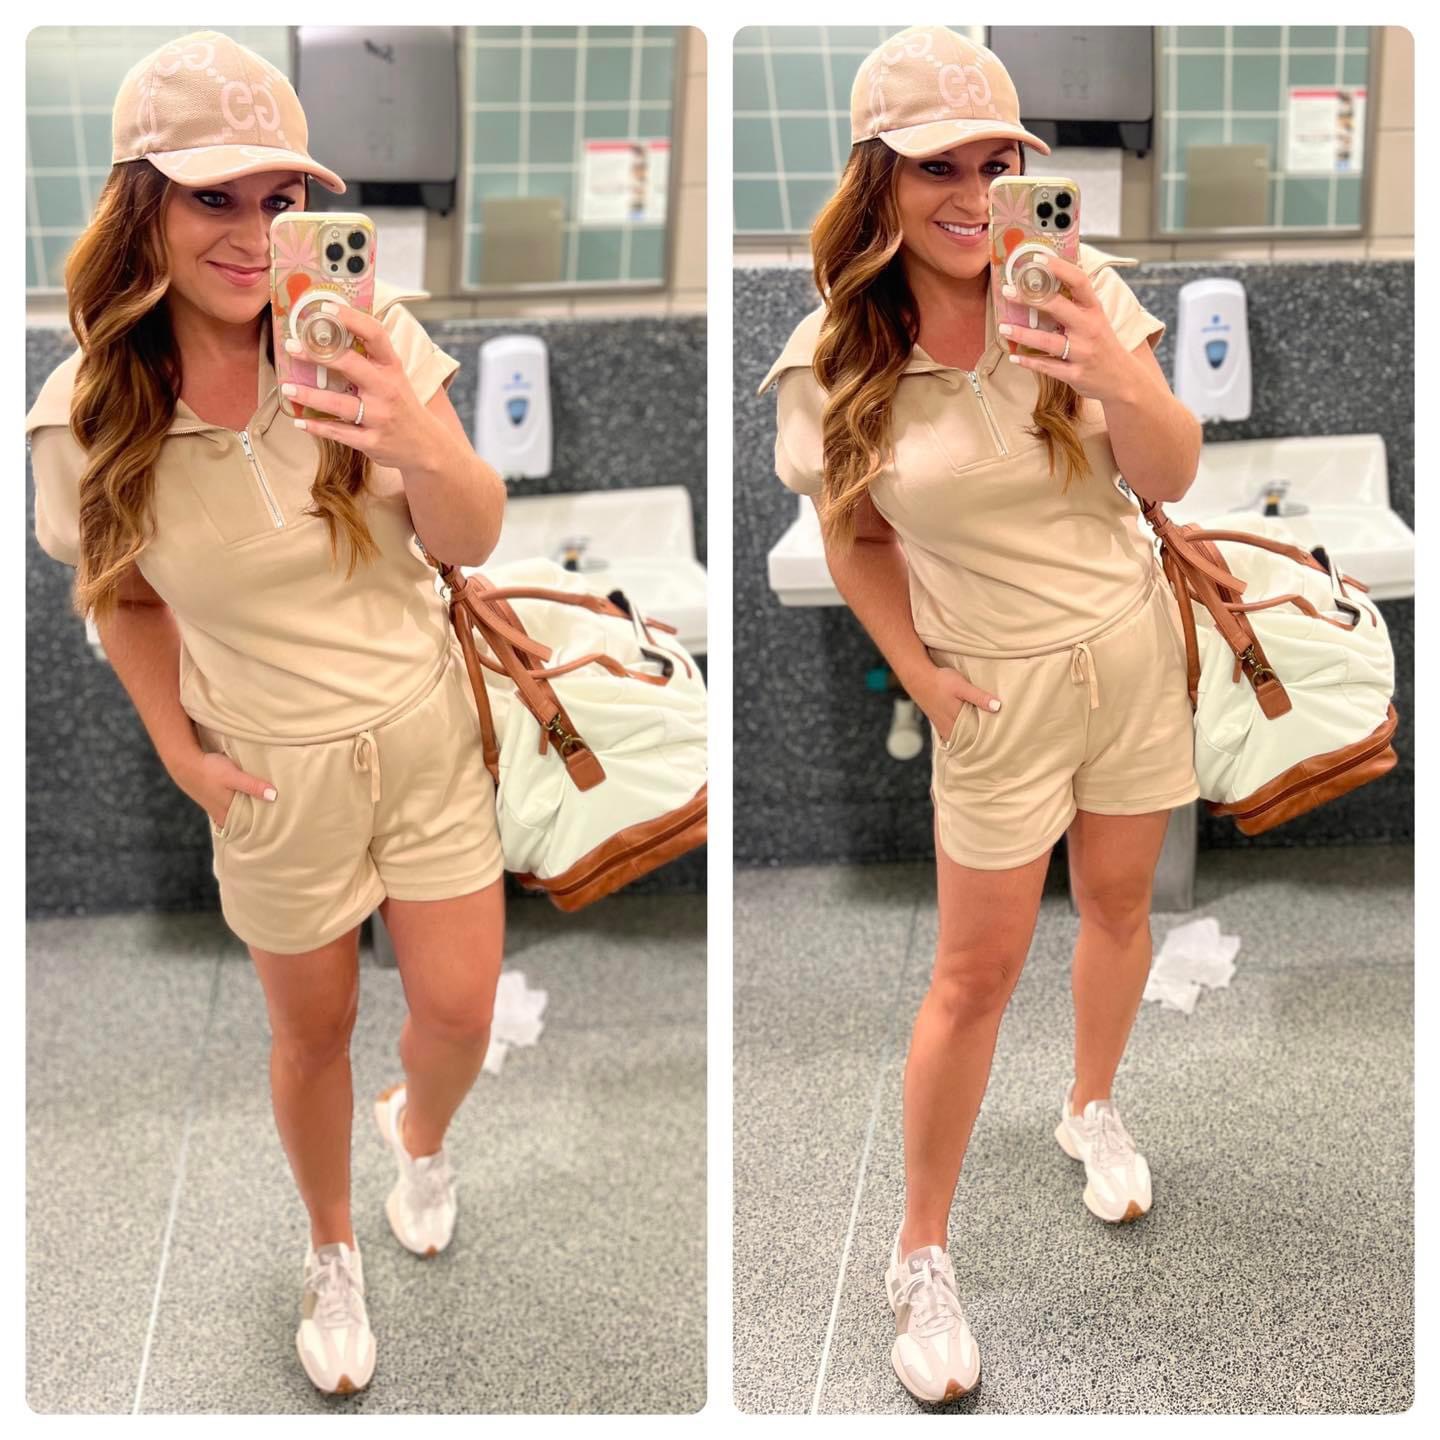 Stylish and Comfortable: Travel Outfit Ideas & Must Haves for Your Next Adventure

travel, travel outfit, vacation, vacation outfit, casual outfit, summer vacation, spring vacation, matching set, hat, sneakers